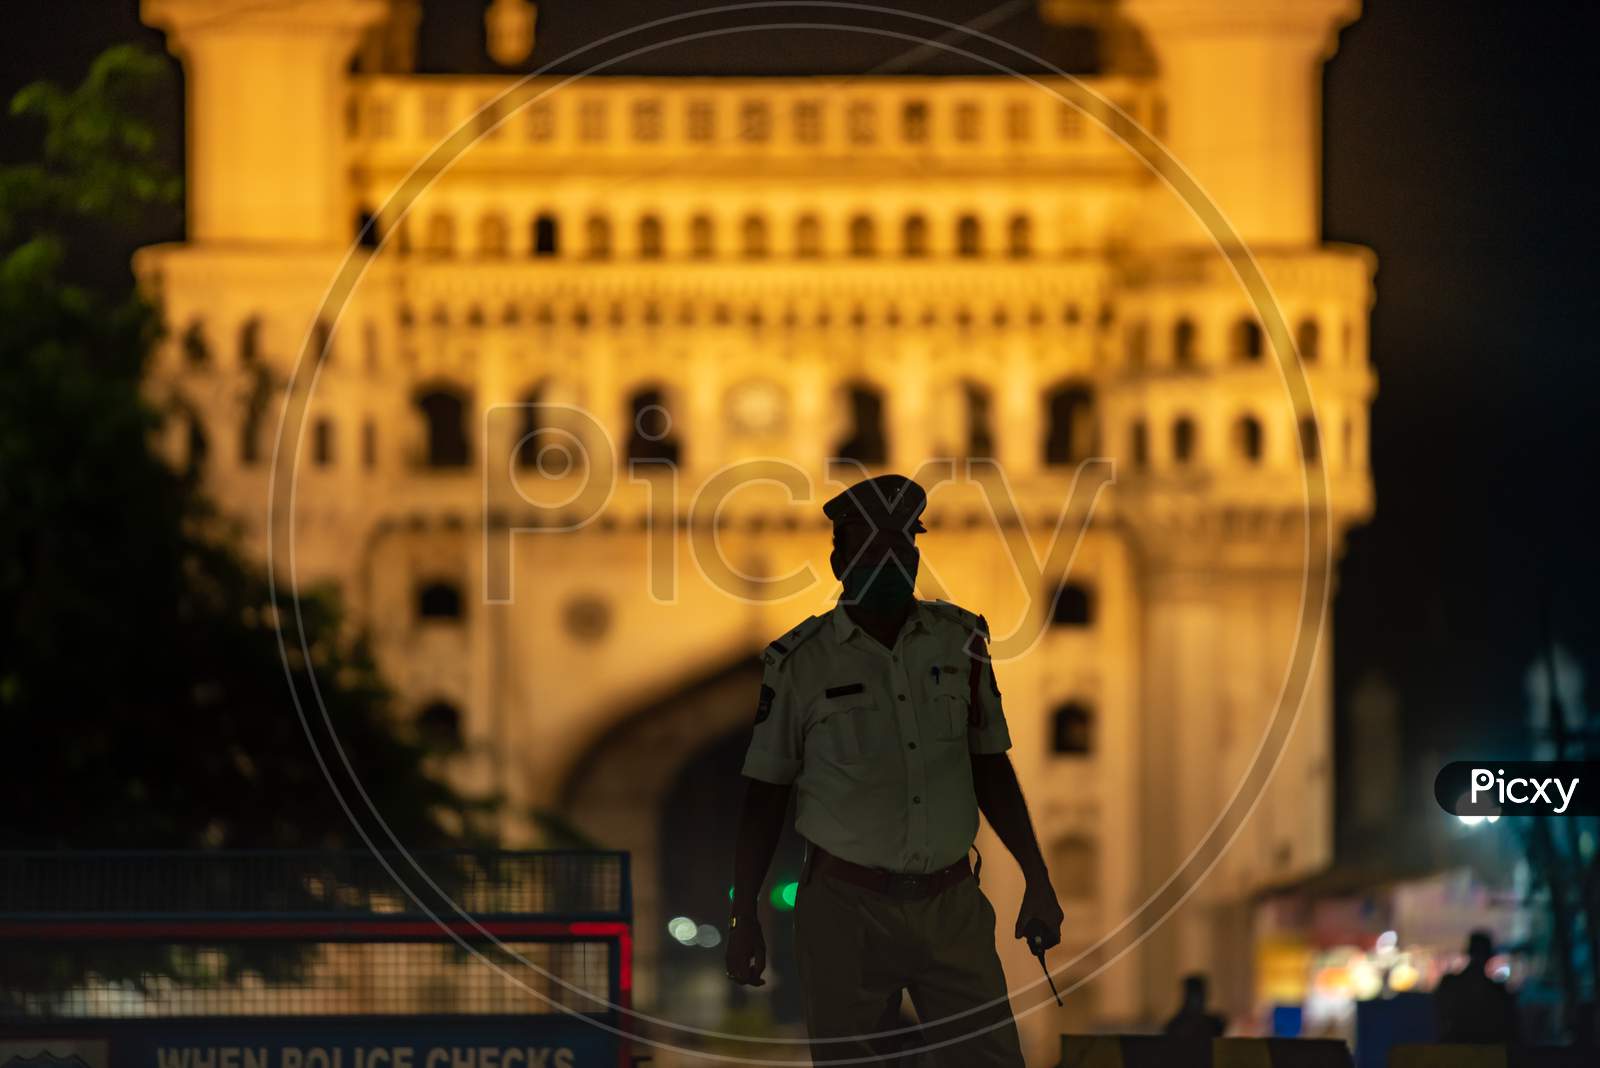 A Hyderabad Traffic Police Officer stands guard at Charminar to impose Night Curfew during the ongoing Lockdown amid Coronavirus Pandemic.  Charminar, Hyderabad, May 30, 2020.